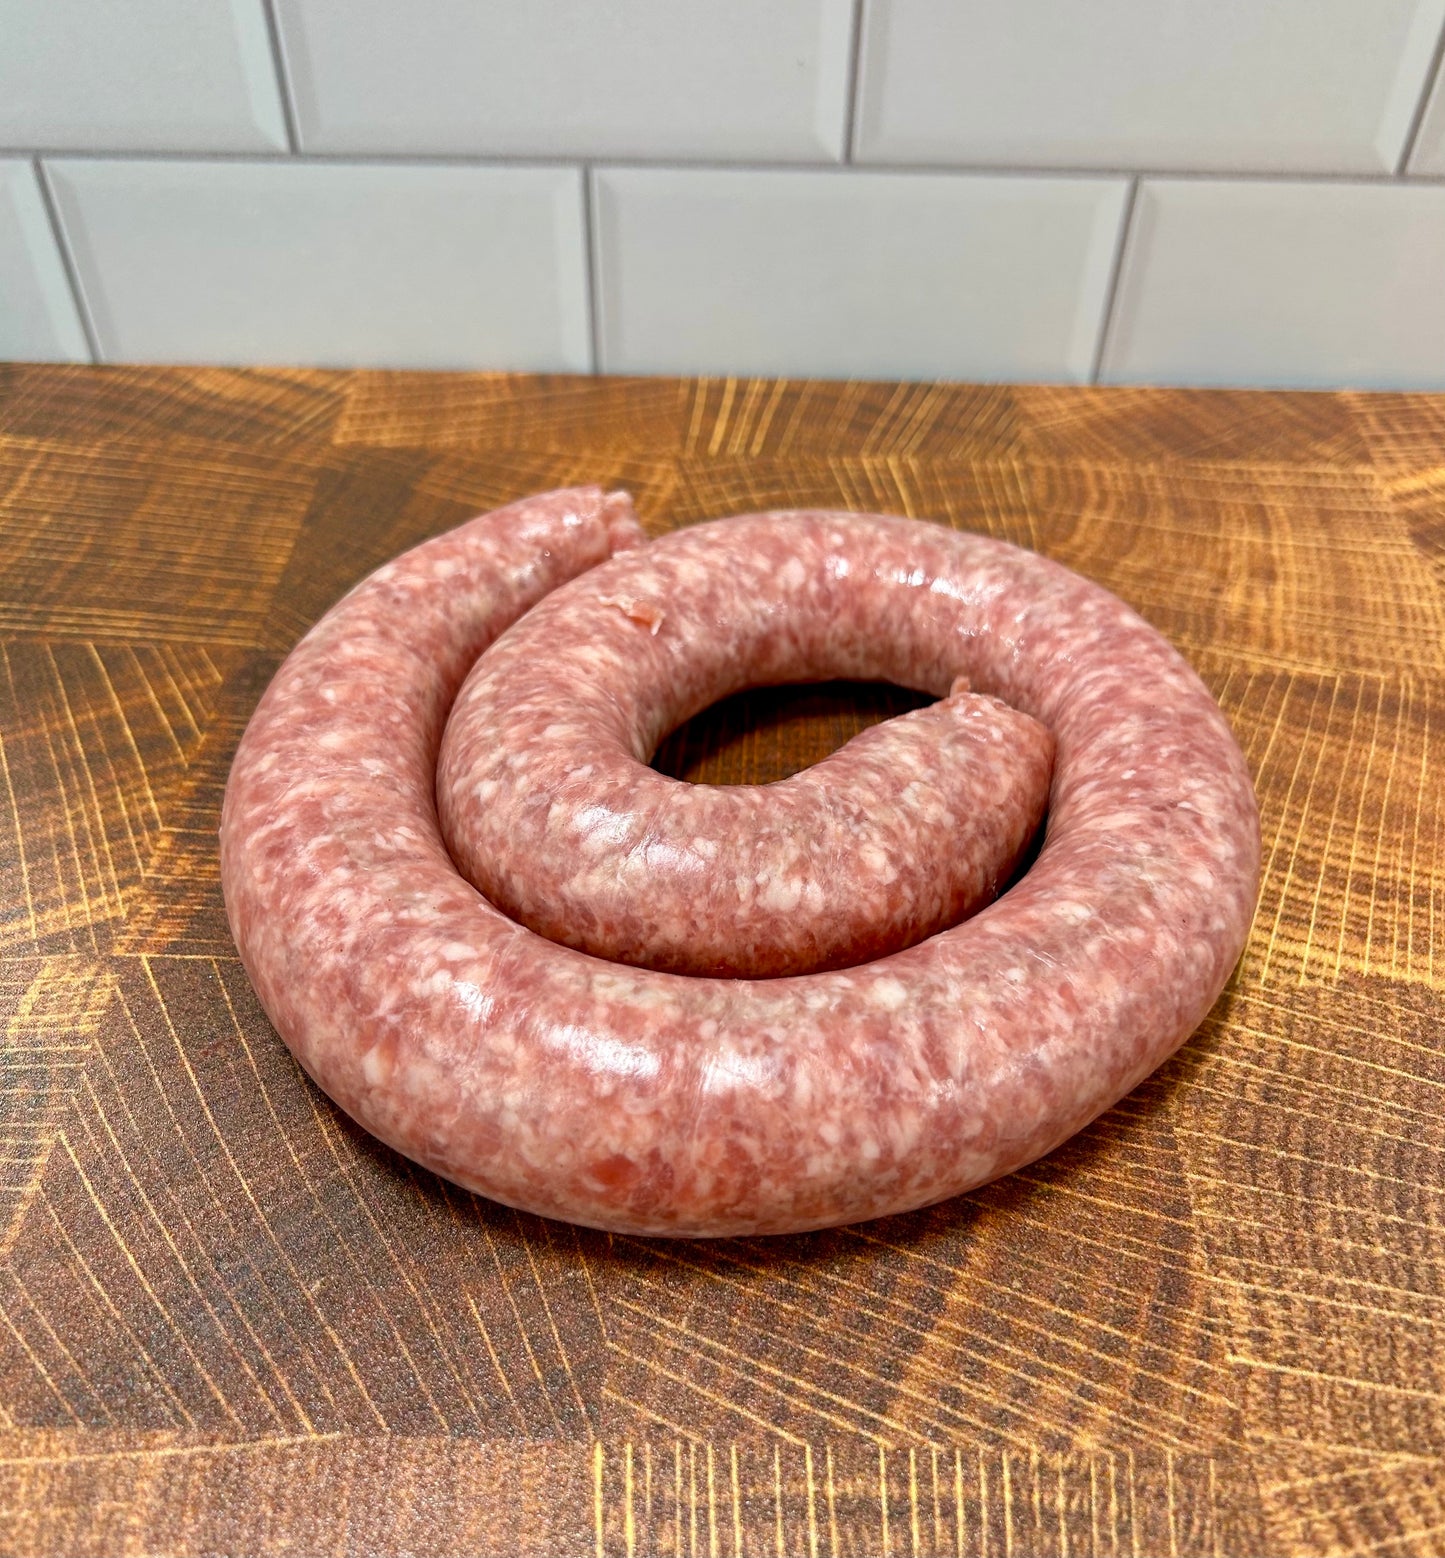 Country Rope Sausage (1 lb)